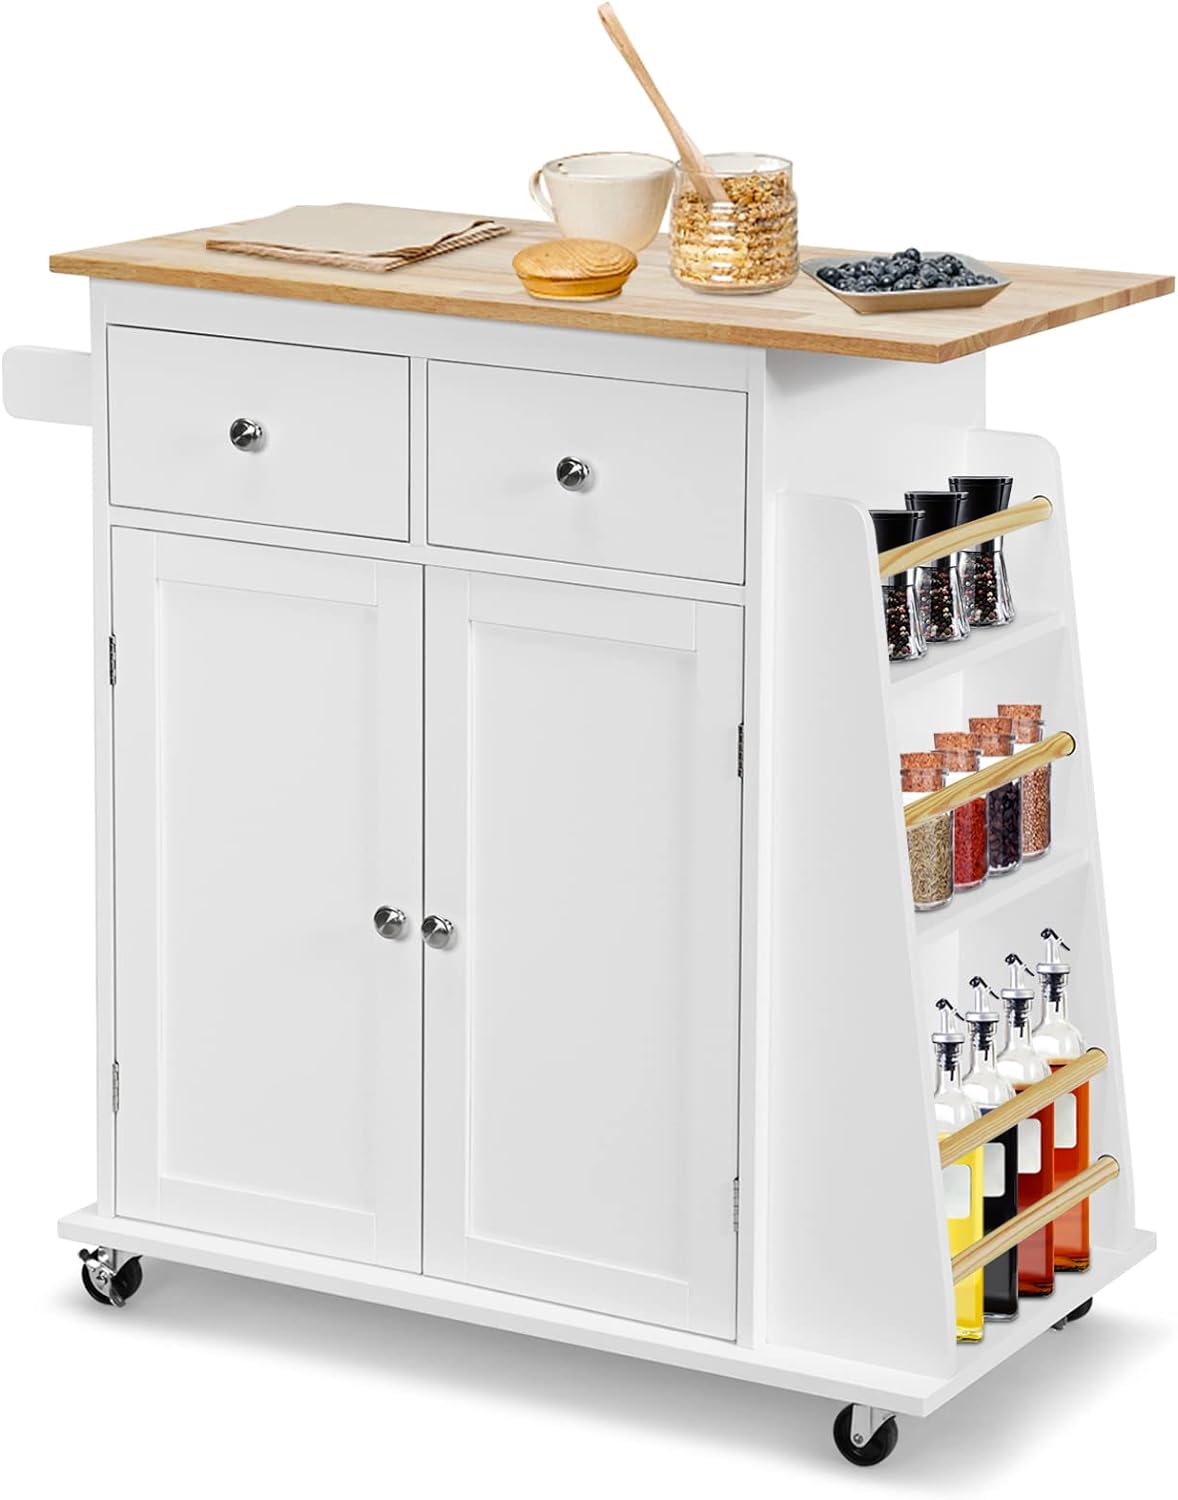 COSTWAY Kitchen Island on Wheels, Utility Trolley Cart with Adjustable Shelf, 2 Drawers, 3-Tier Spice Rack, Towel Rack, 2-Door Cabinet, Rubber Wood Countertop, Lockable Casters for Dining Room (White)